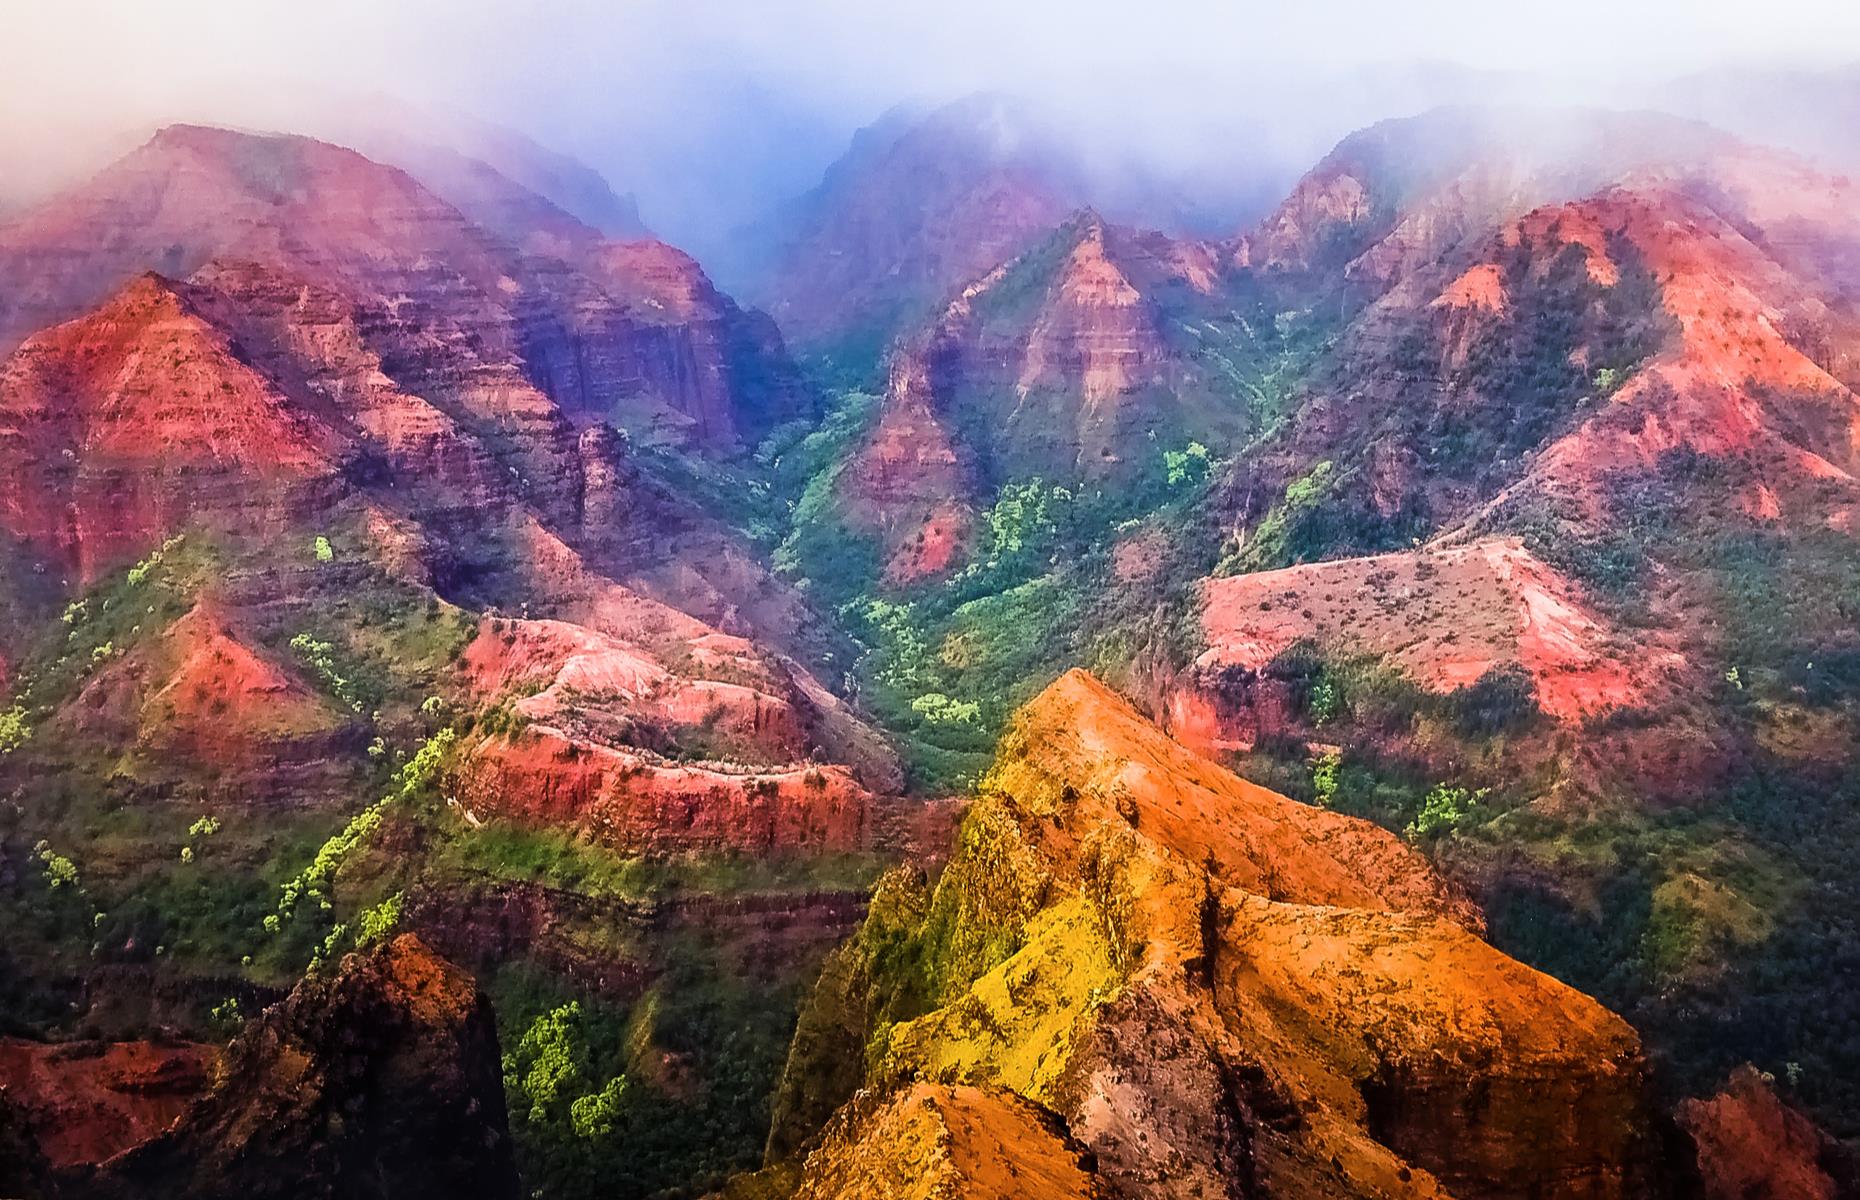 <p>The rugged red and green rocks of Hawaii's Nāpali Coast State Wilderness Park look more suited to Mars than Earth. 'Na Pali' means "high cliffs", and the tallest mountains here soar to 4,000 feet (1,200m). The best way to take in the prismatic peaks is from the Kalalau Trail, a hardy, 11-mile (17km) route that rewards its hikers with a sandy beach at the end. The trail reopened in 2019 (due to damage caused by flooding) and <a href="https://www.gohaena.com/">online reservations</a> are required in advance.</p>